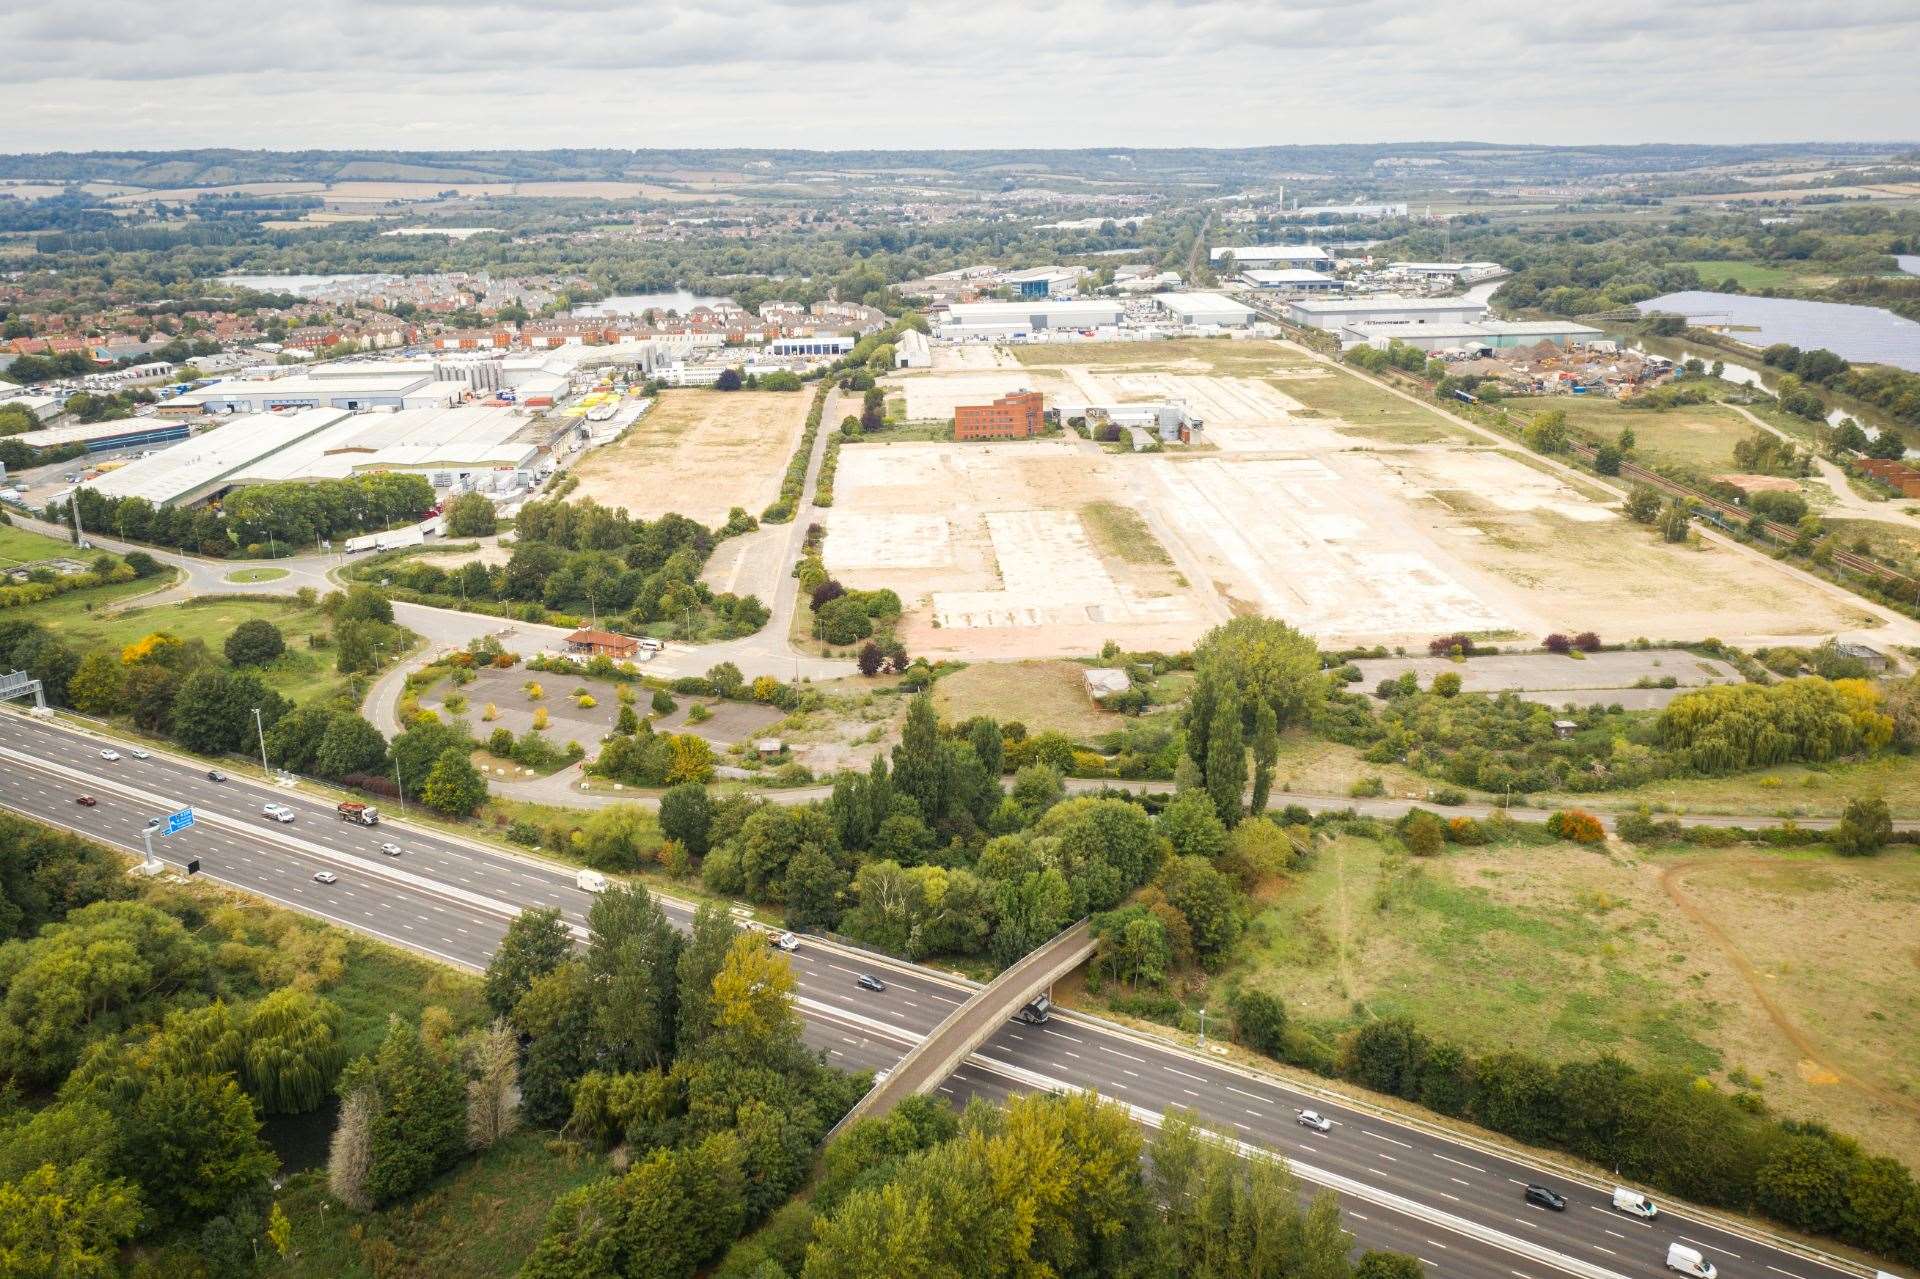 The Aylesford Newsprint site could be set for a major redevelopment - if plans get the green light this month